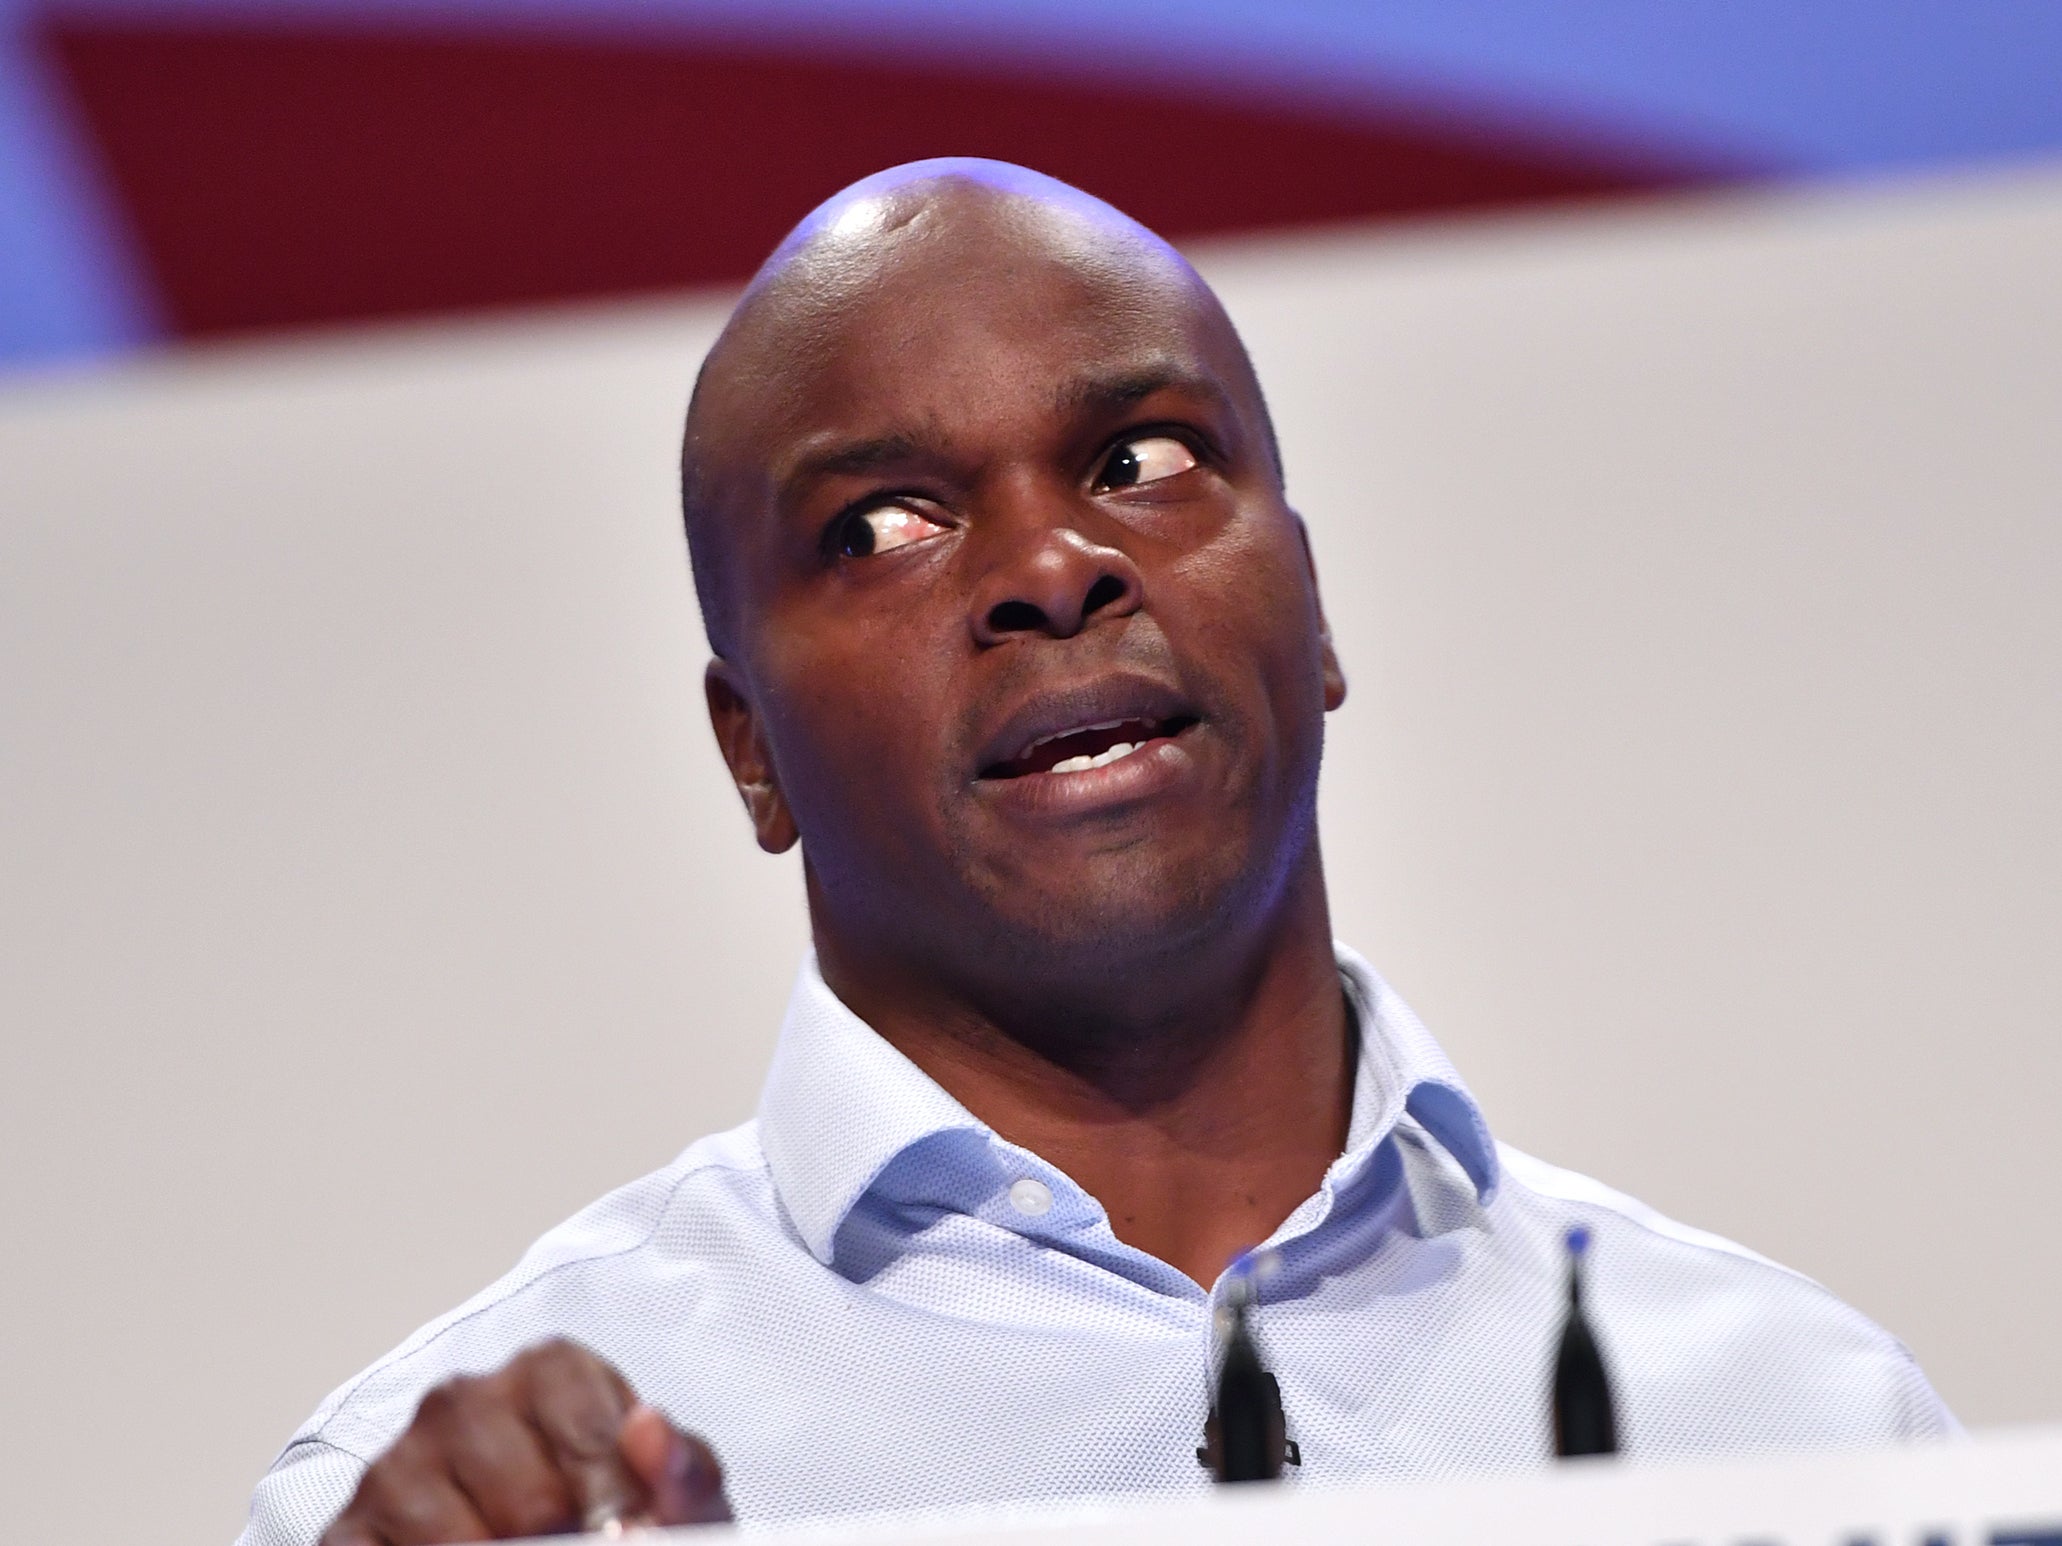 Conservative London Mayoral candidate Shaun Bailey speaks during the Conservative Party Conference on 3 October, 2018 in Birmingham, England. Mr Bailey has faced scrutiny after his campaign sent out ‘fake’ flyers inaccurately warning of a council tax rise.